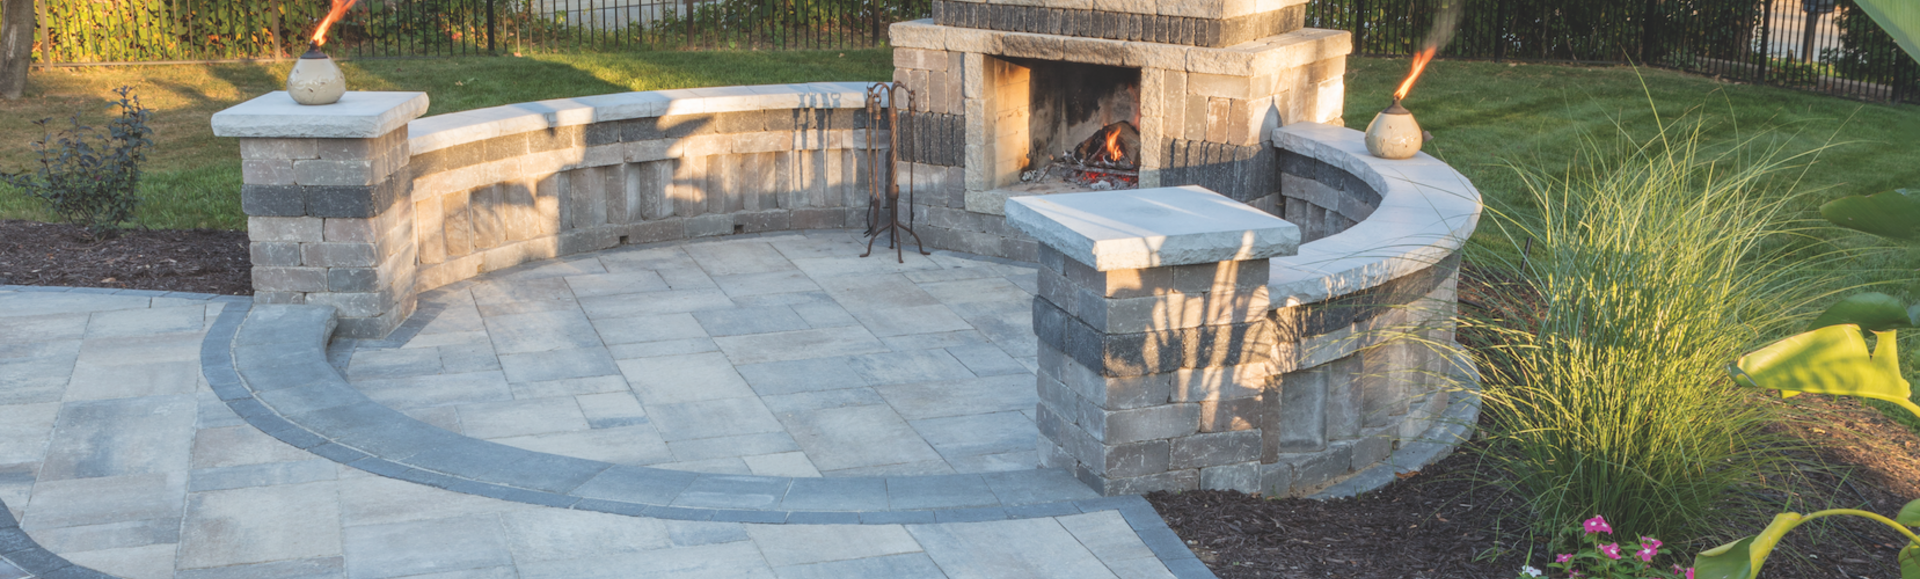 Patio with pool and fireplace using Rialto, Cassina Coping and Classic Series products from Brampton Brick